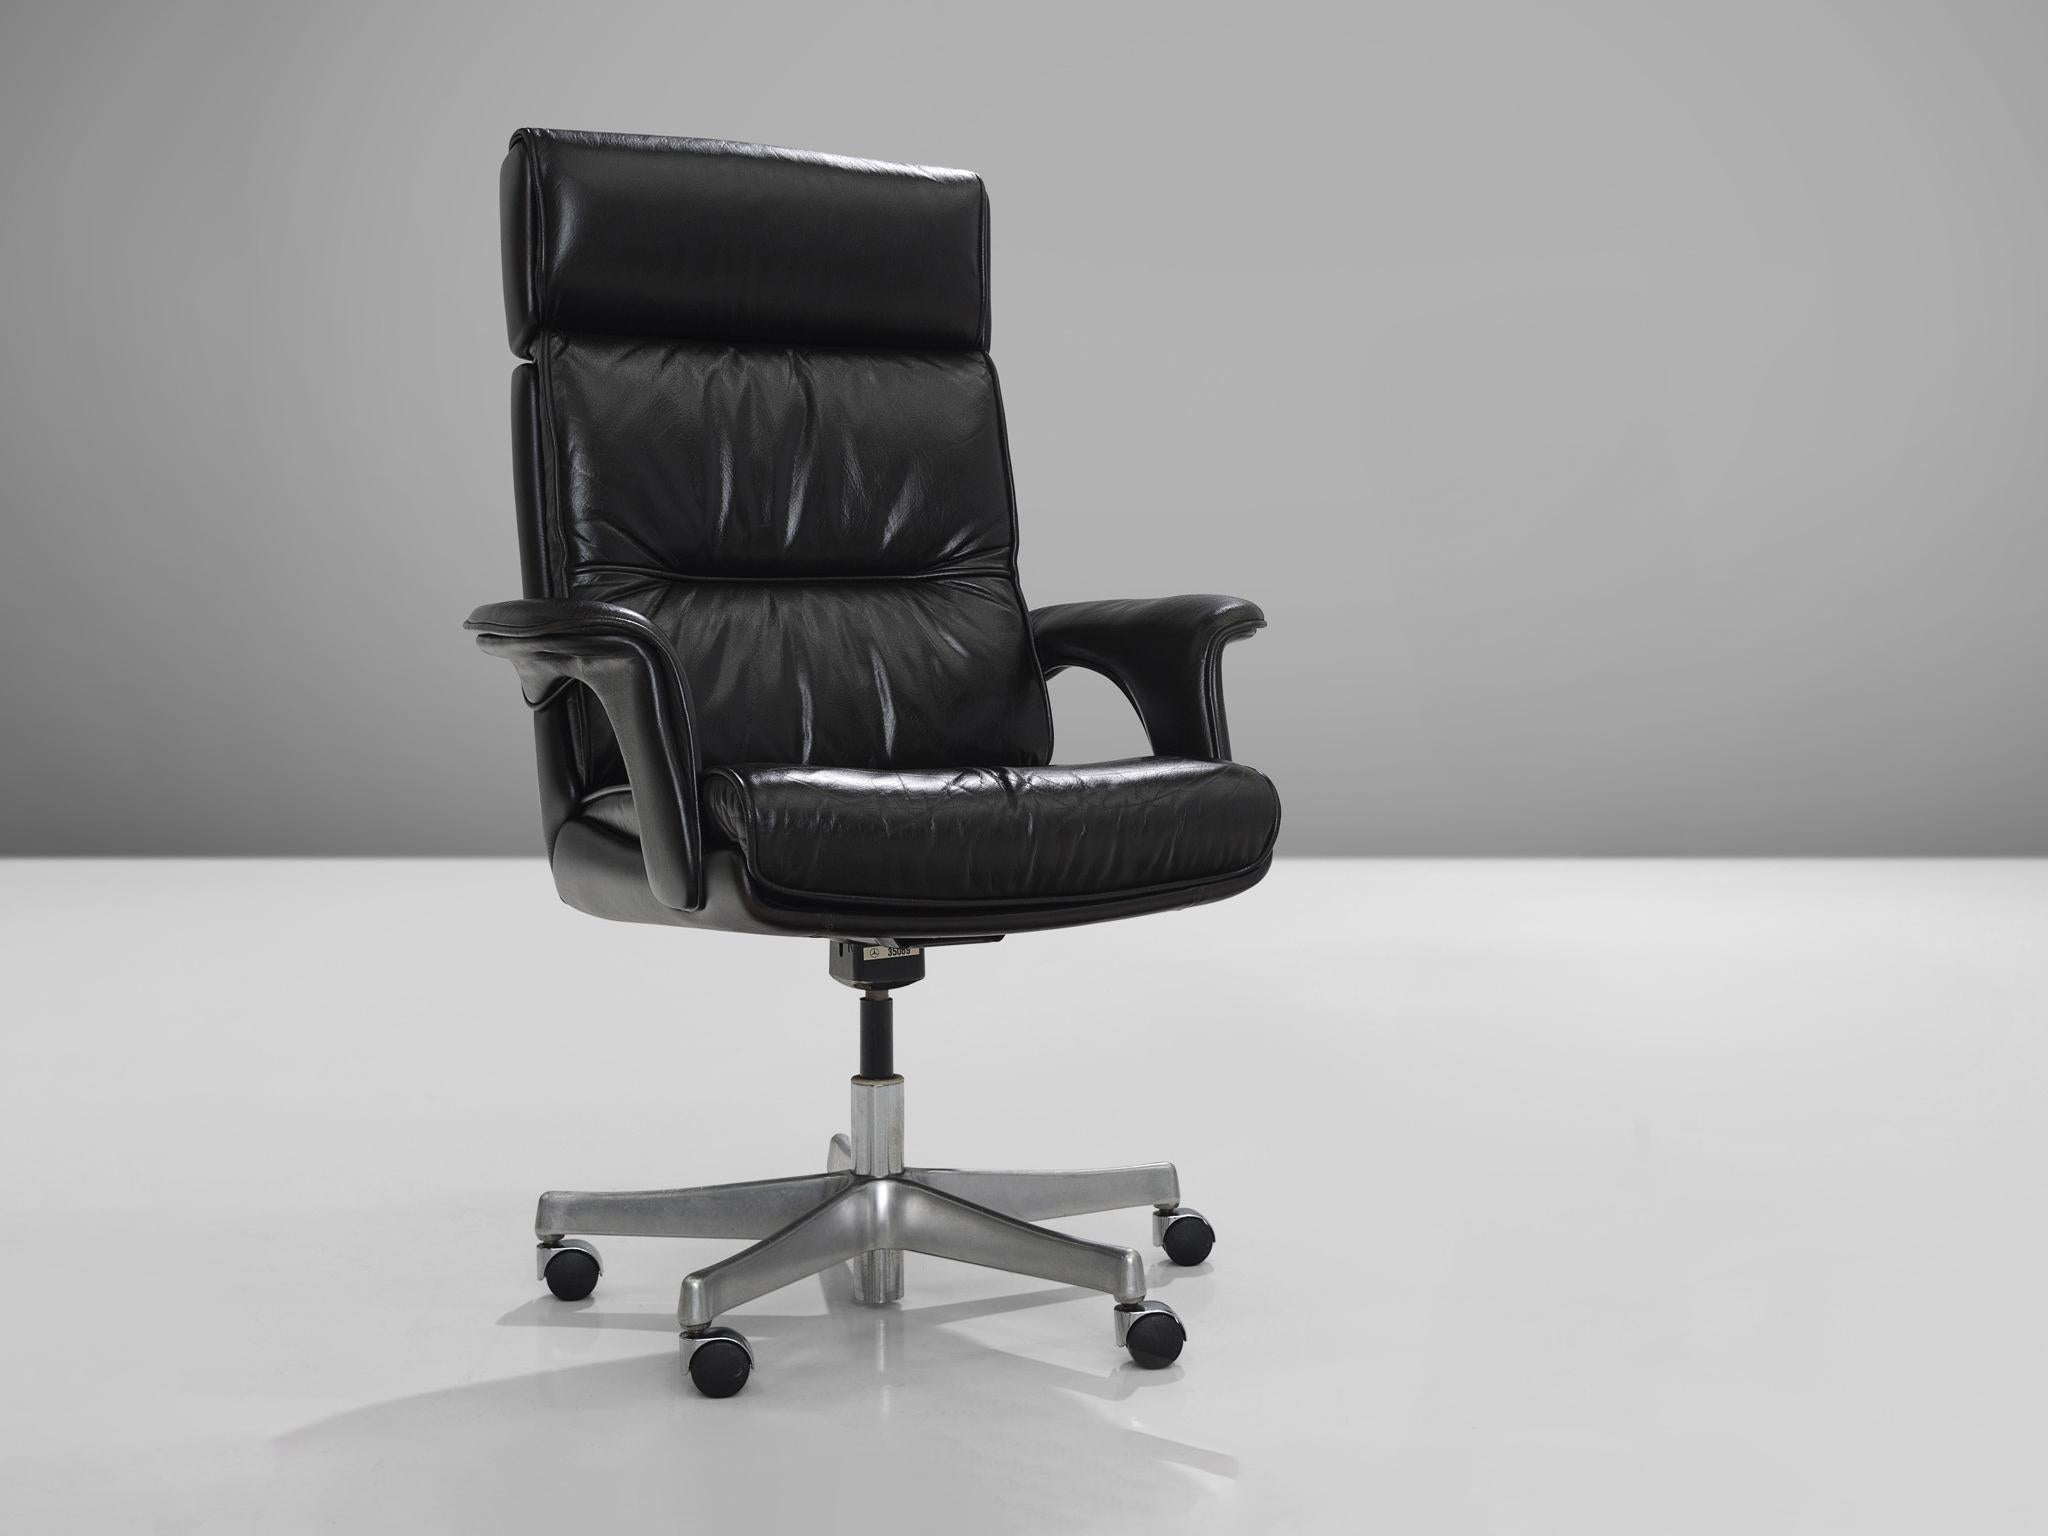 Conference chairs, leather, metal, Europe, 1980s.

These comfortable and fully adjustable swiveling executive armchairs are upholstered with a black leather. The leather has aged over time and is therefore very soft and shows great patina. The seat